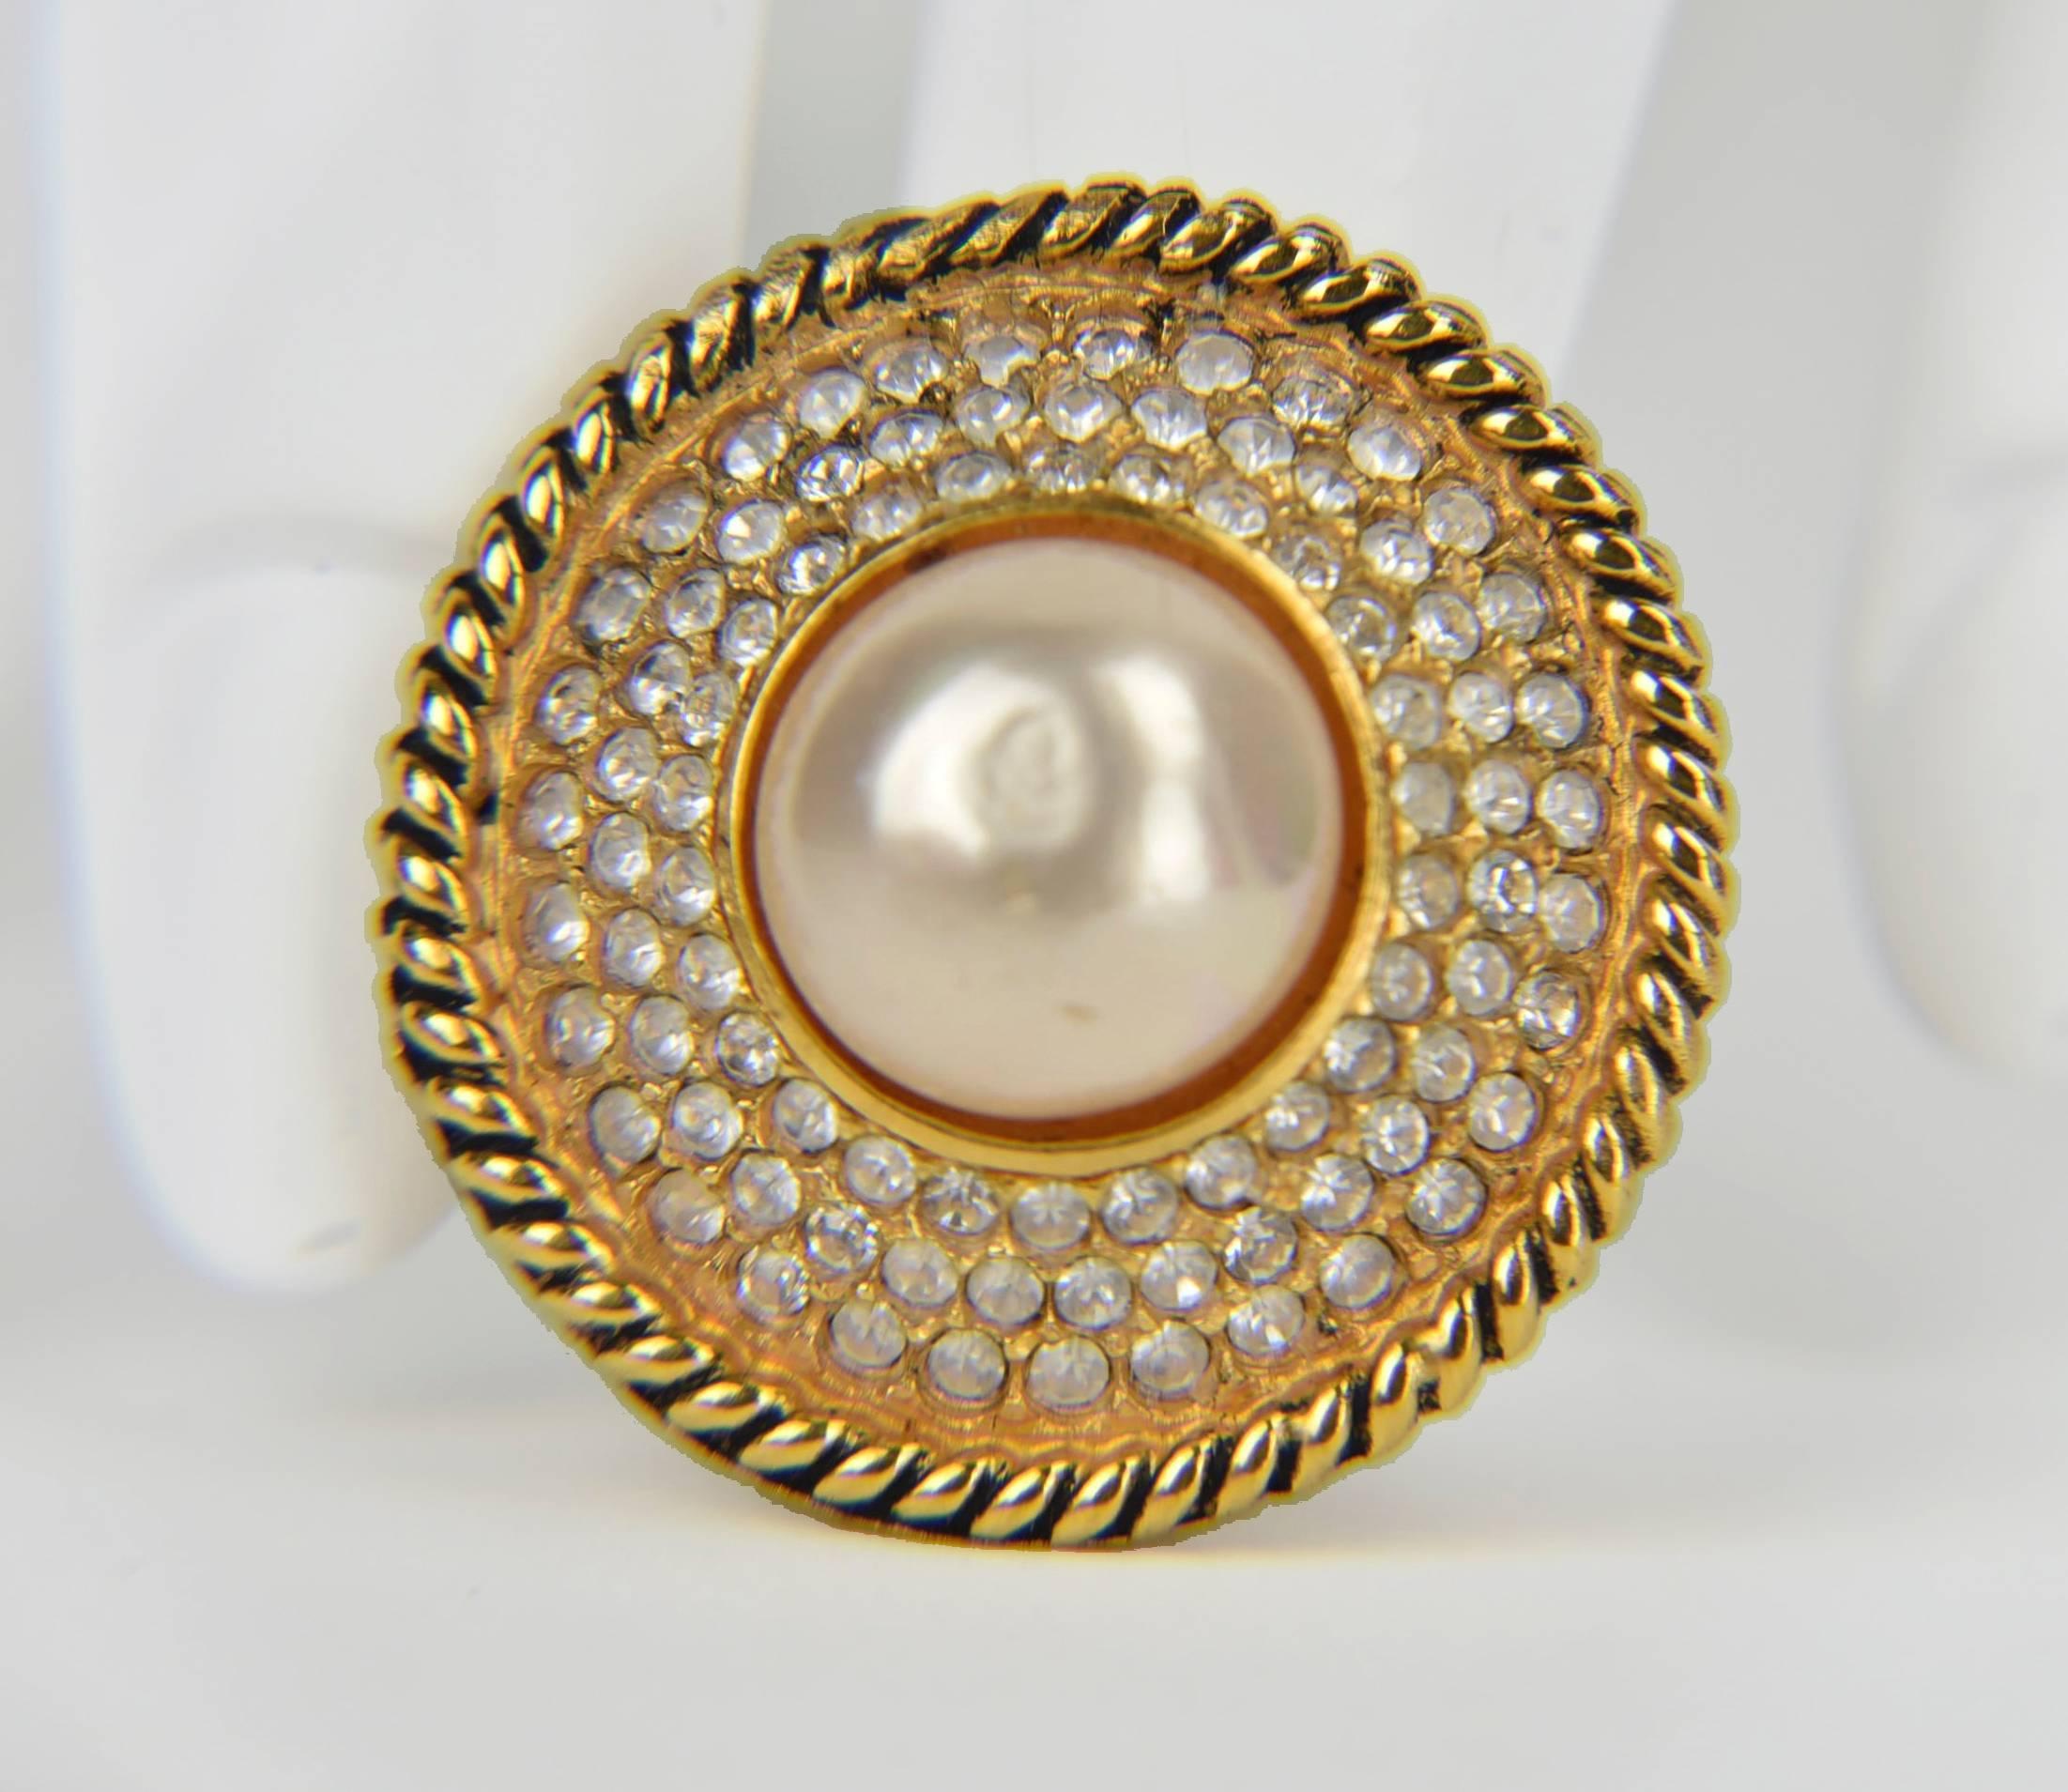 Beautiful and Classic Chanel clip earrings. A dramatic look.
Measurements: Earring is 1.25"in diameter and the pearl is .5" in diameter.